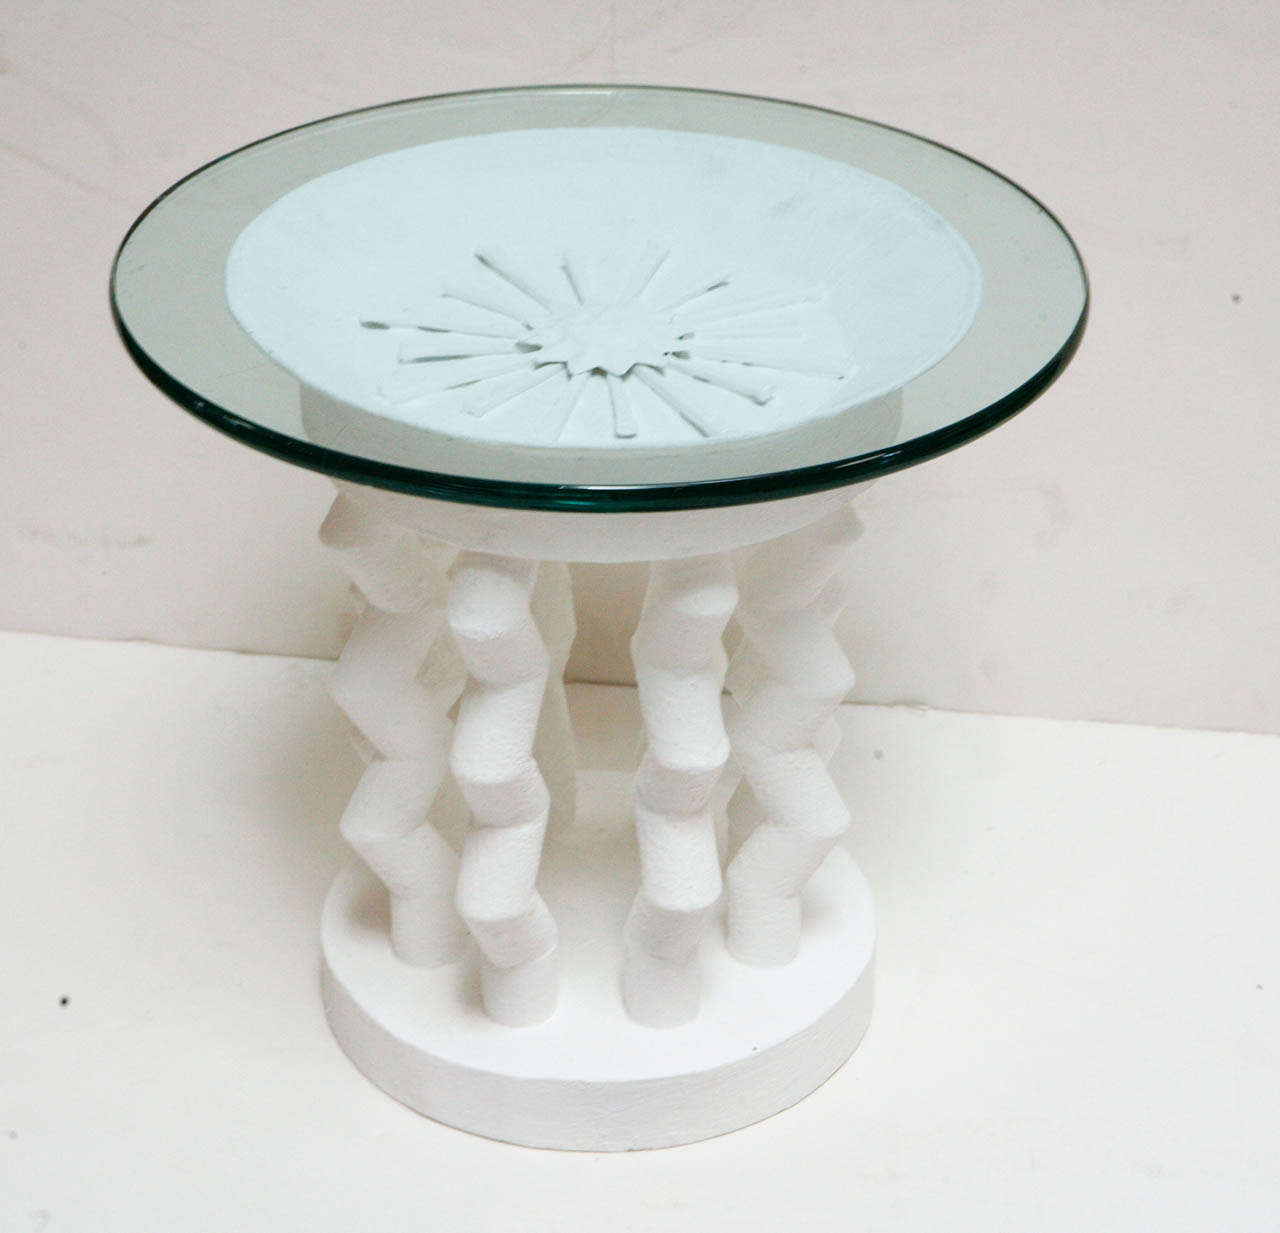 Round White plaster side table with geometric shaped base with intricate sunburst detail on top.  Metal frame coated in a white plaster.